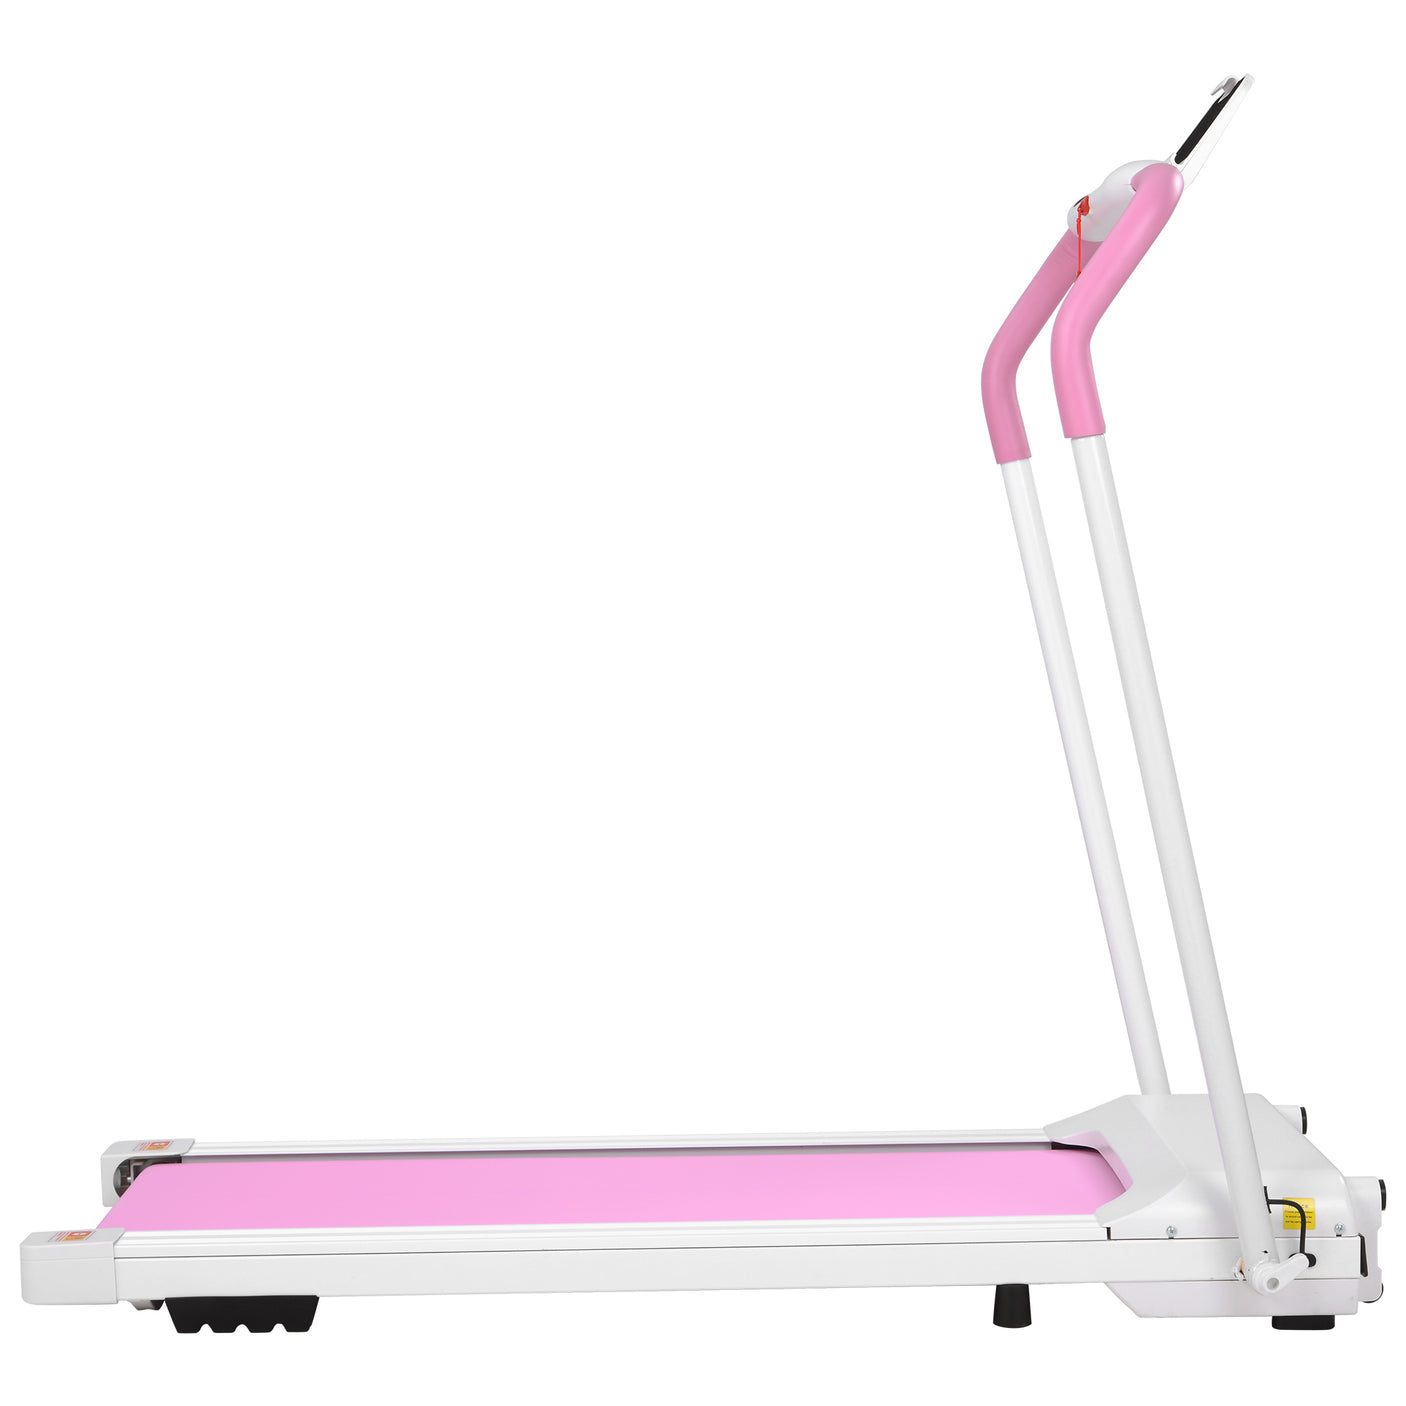 FYC Treadmill Folding Treadmill for Home Portable Electric Motorized Treadmill Running Exercise Machine Compact Treadmill for Home Gym Fitness Workout Walking, No Installation Required, White&Pink